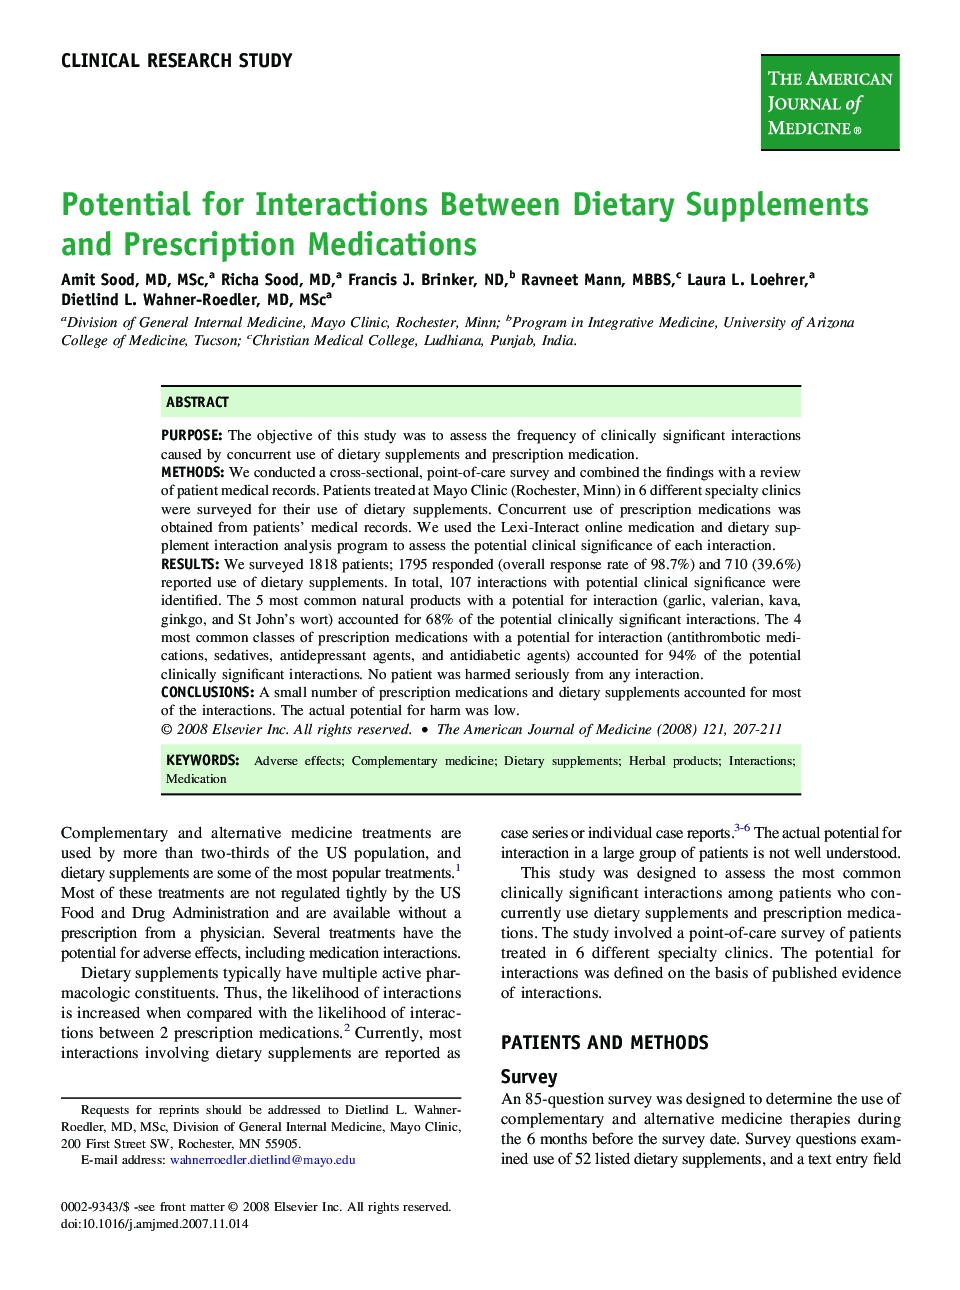 Potential for Interactions Between Dietary Supplements and Prescription Medications